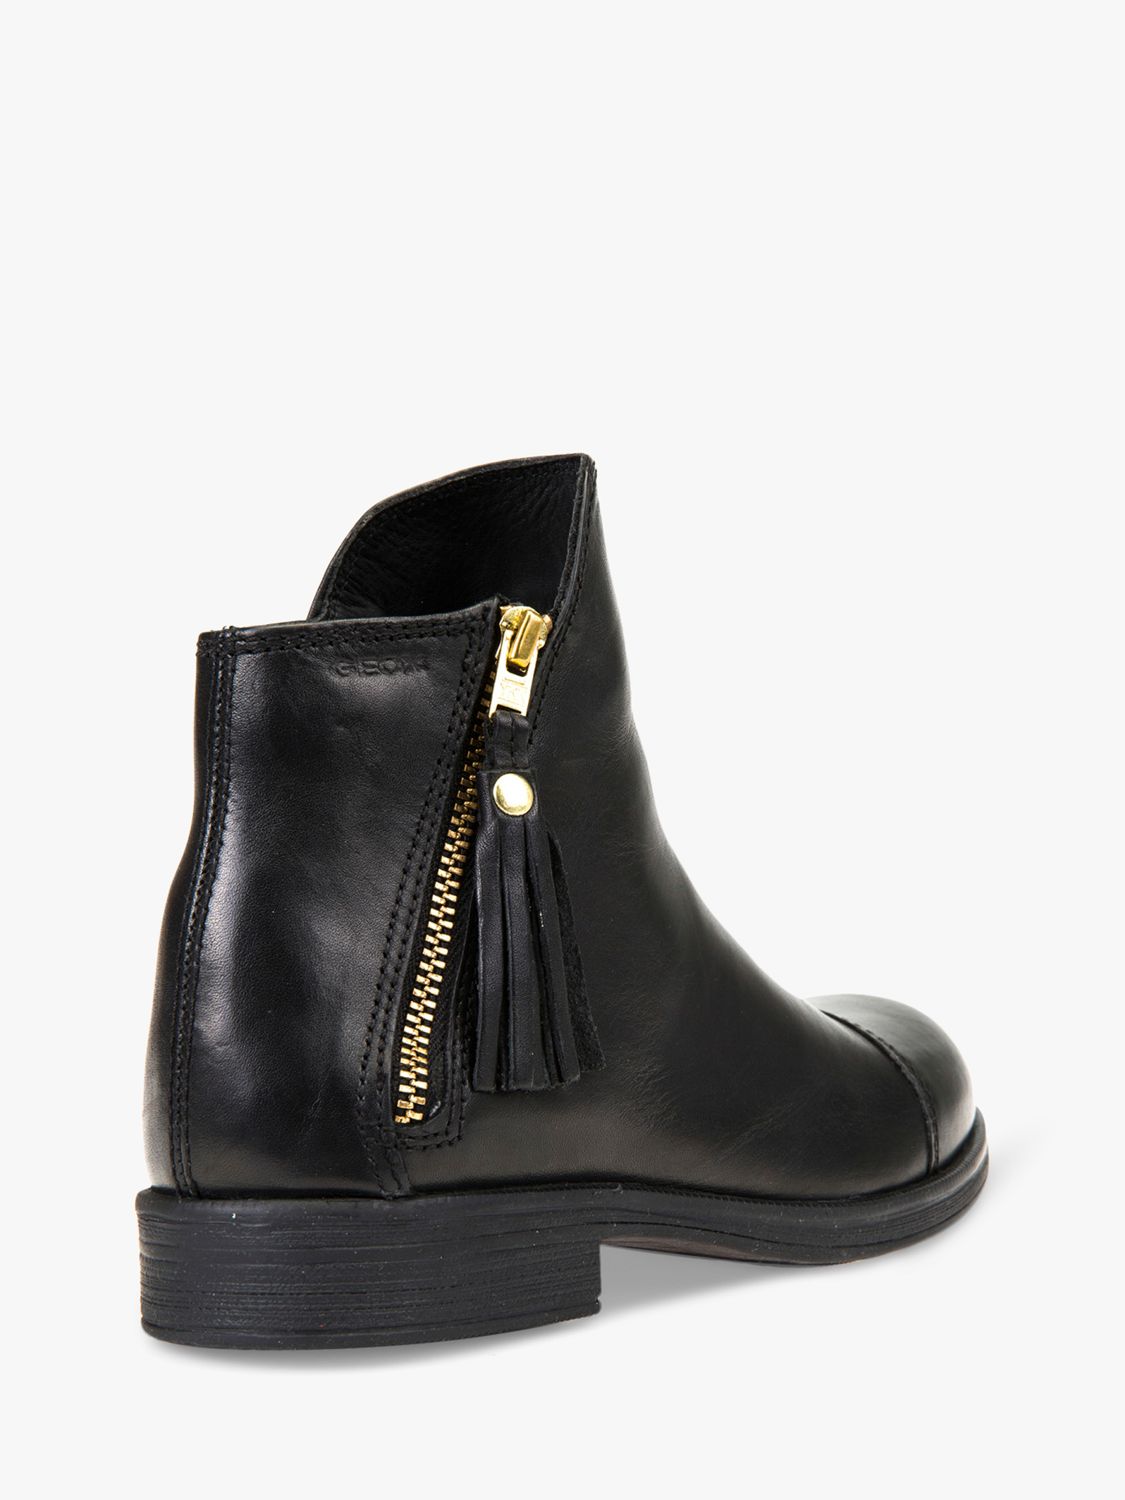 Buy Geox Kids' Agata Leather Boots Online at johnlewis.com